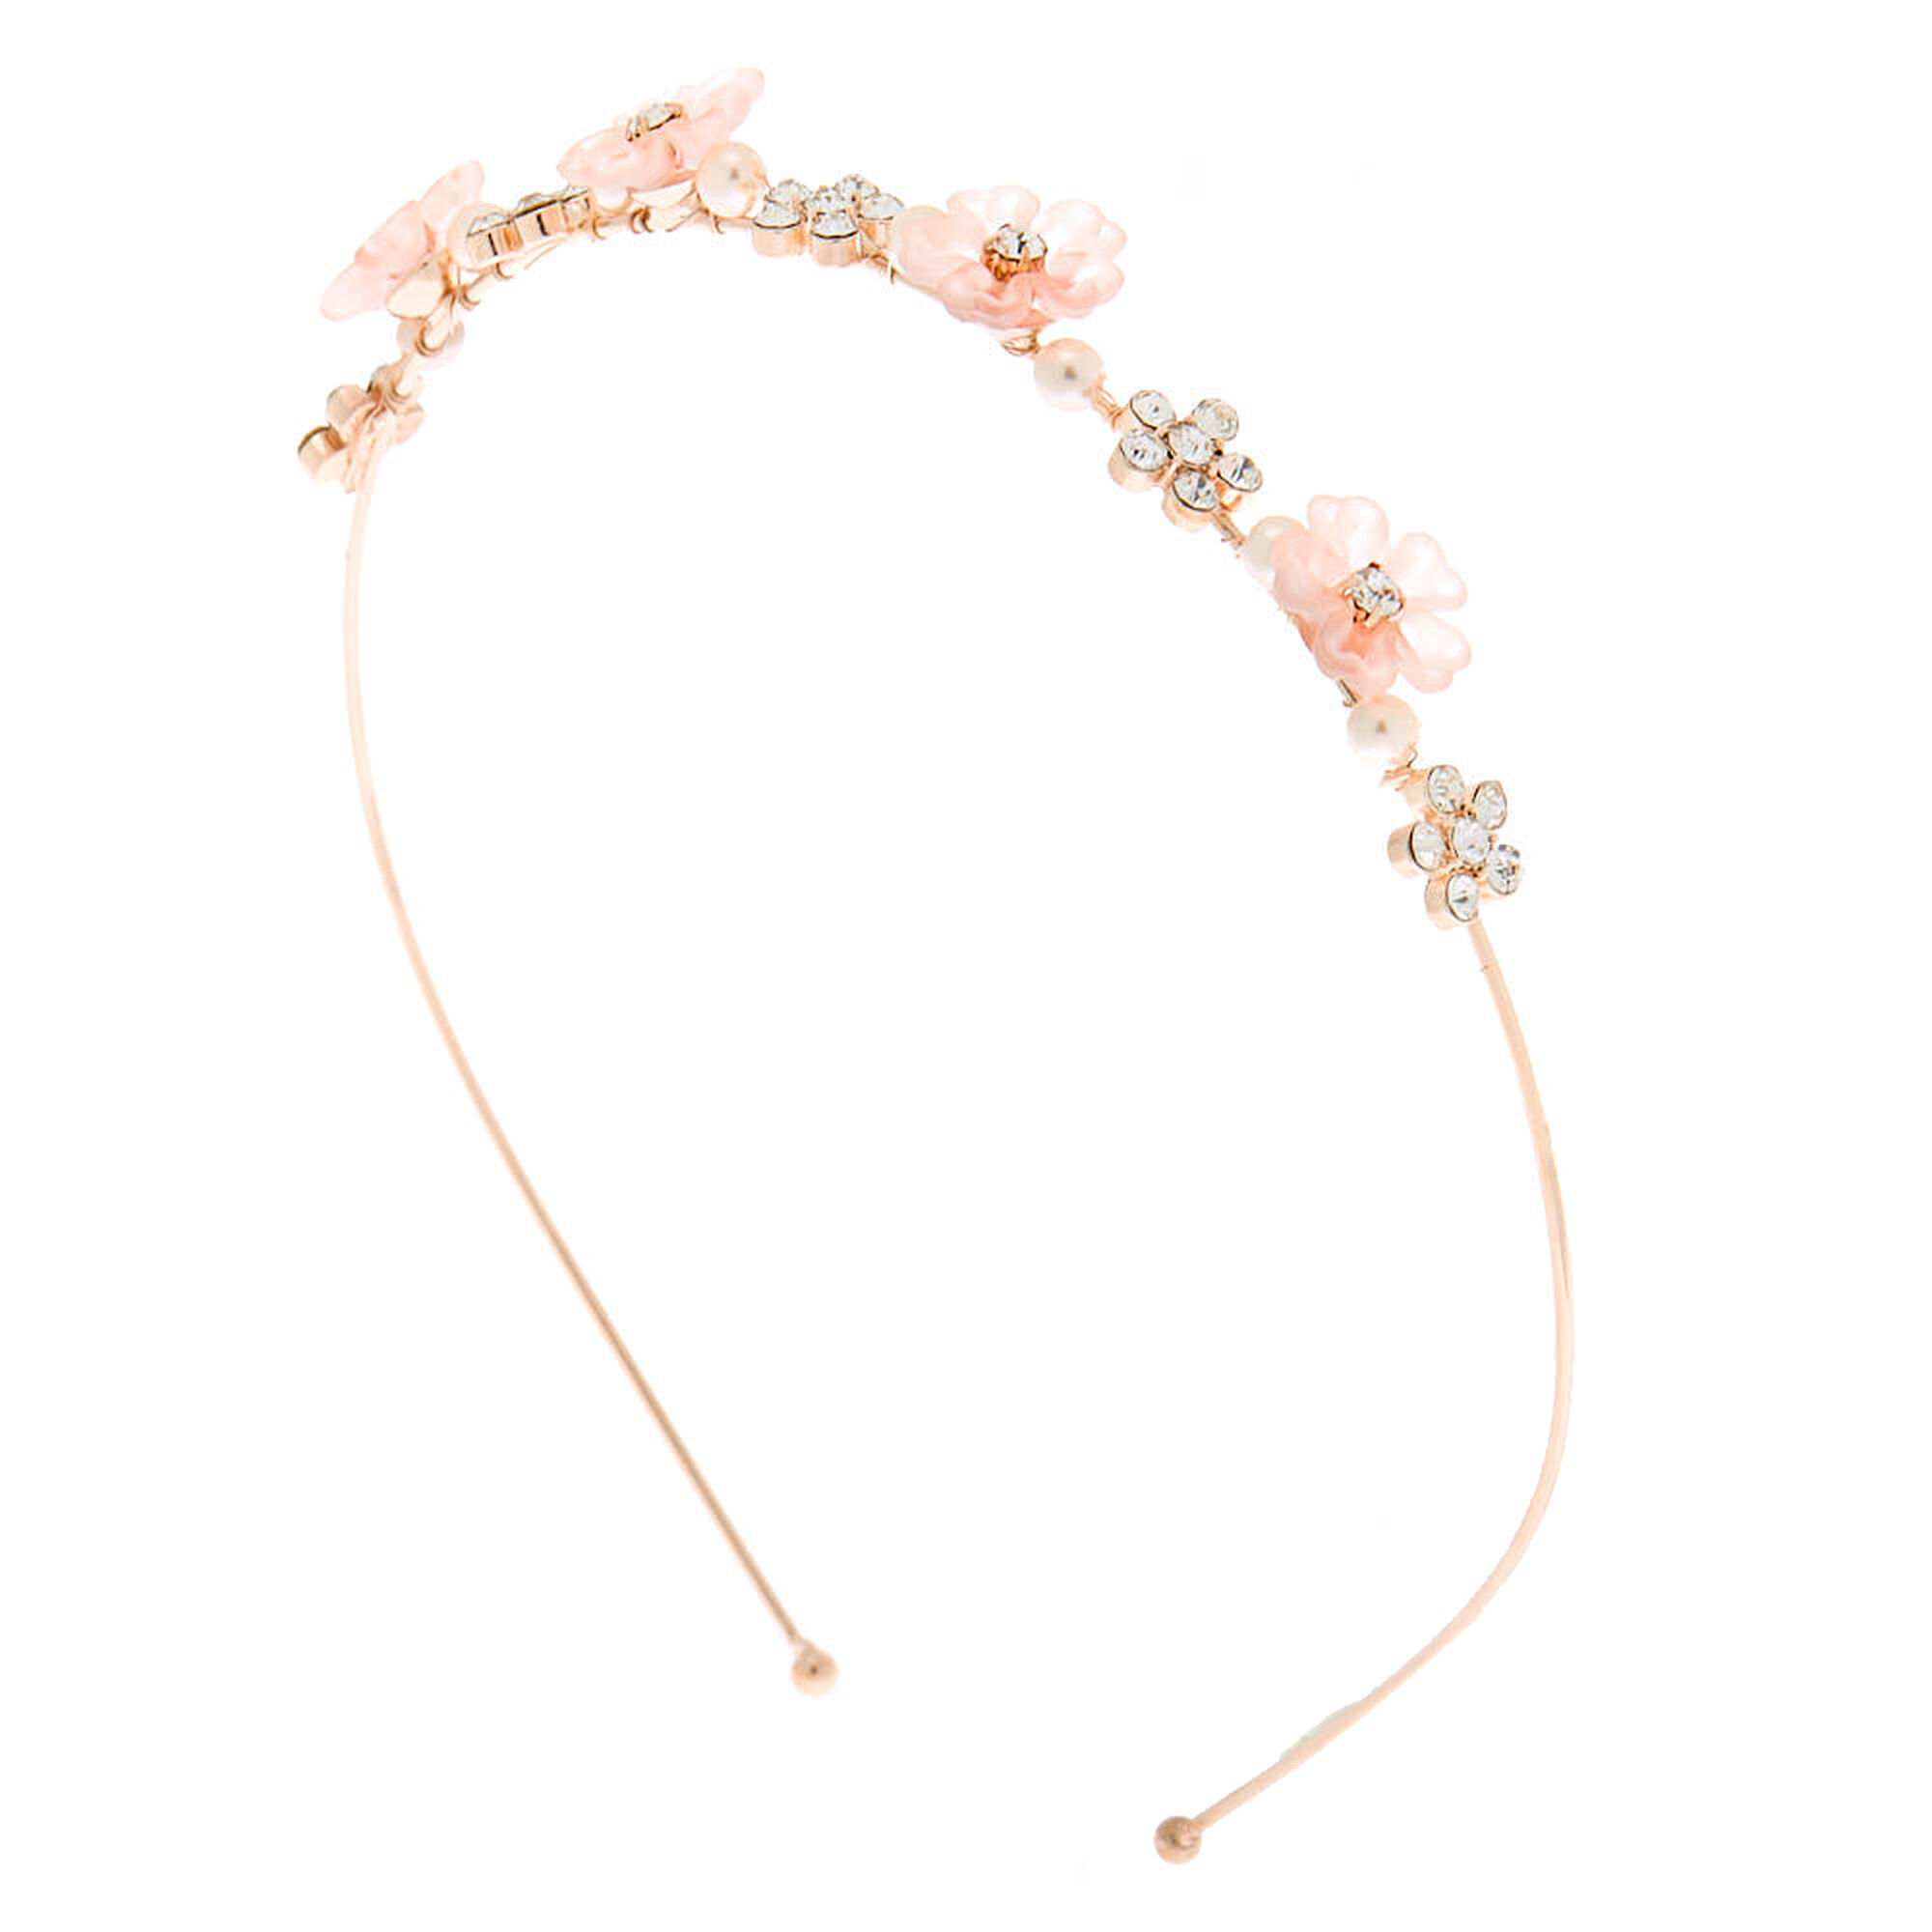 View Claires Rose GoldTone Frosted Floral Headband Pink information